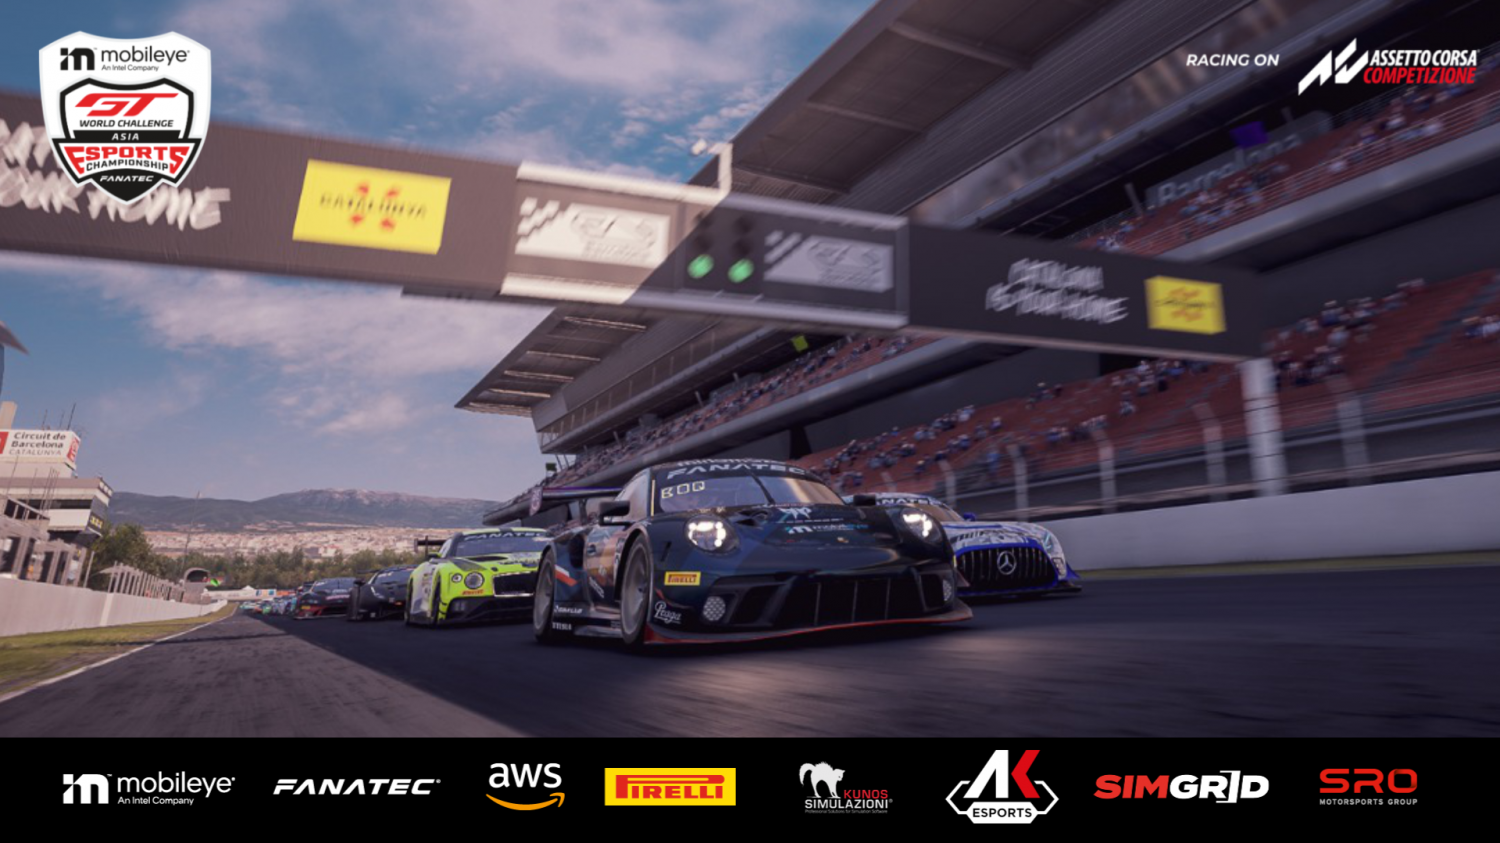 Boquida with dominant victory in Mobileye GT World Challenge Asia Esports opening round in Barcelona